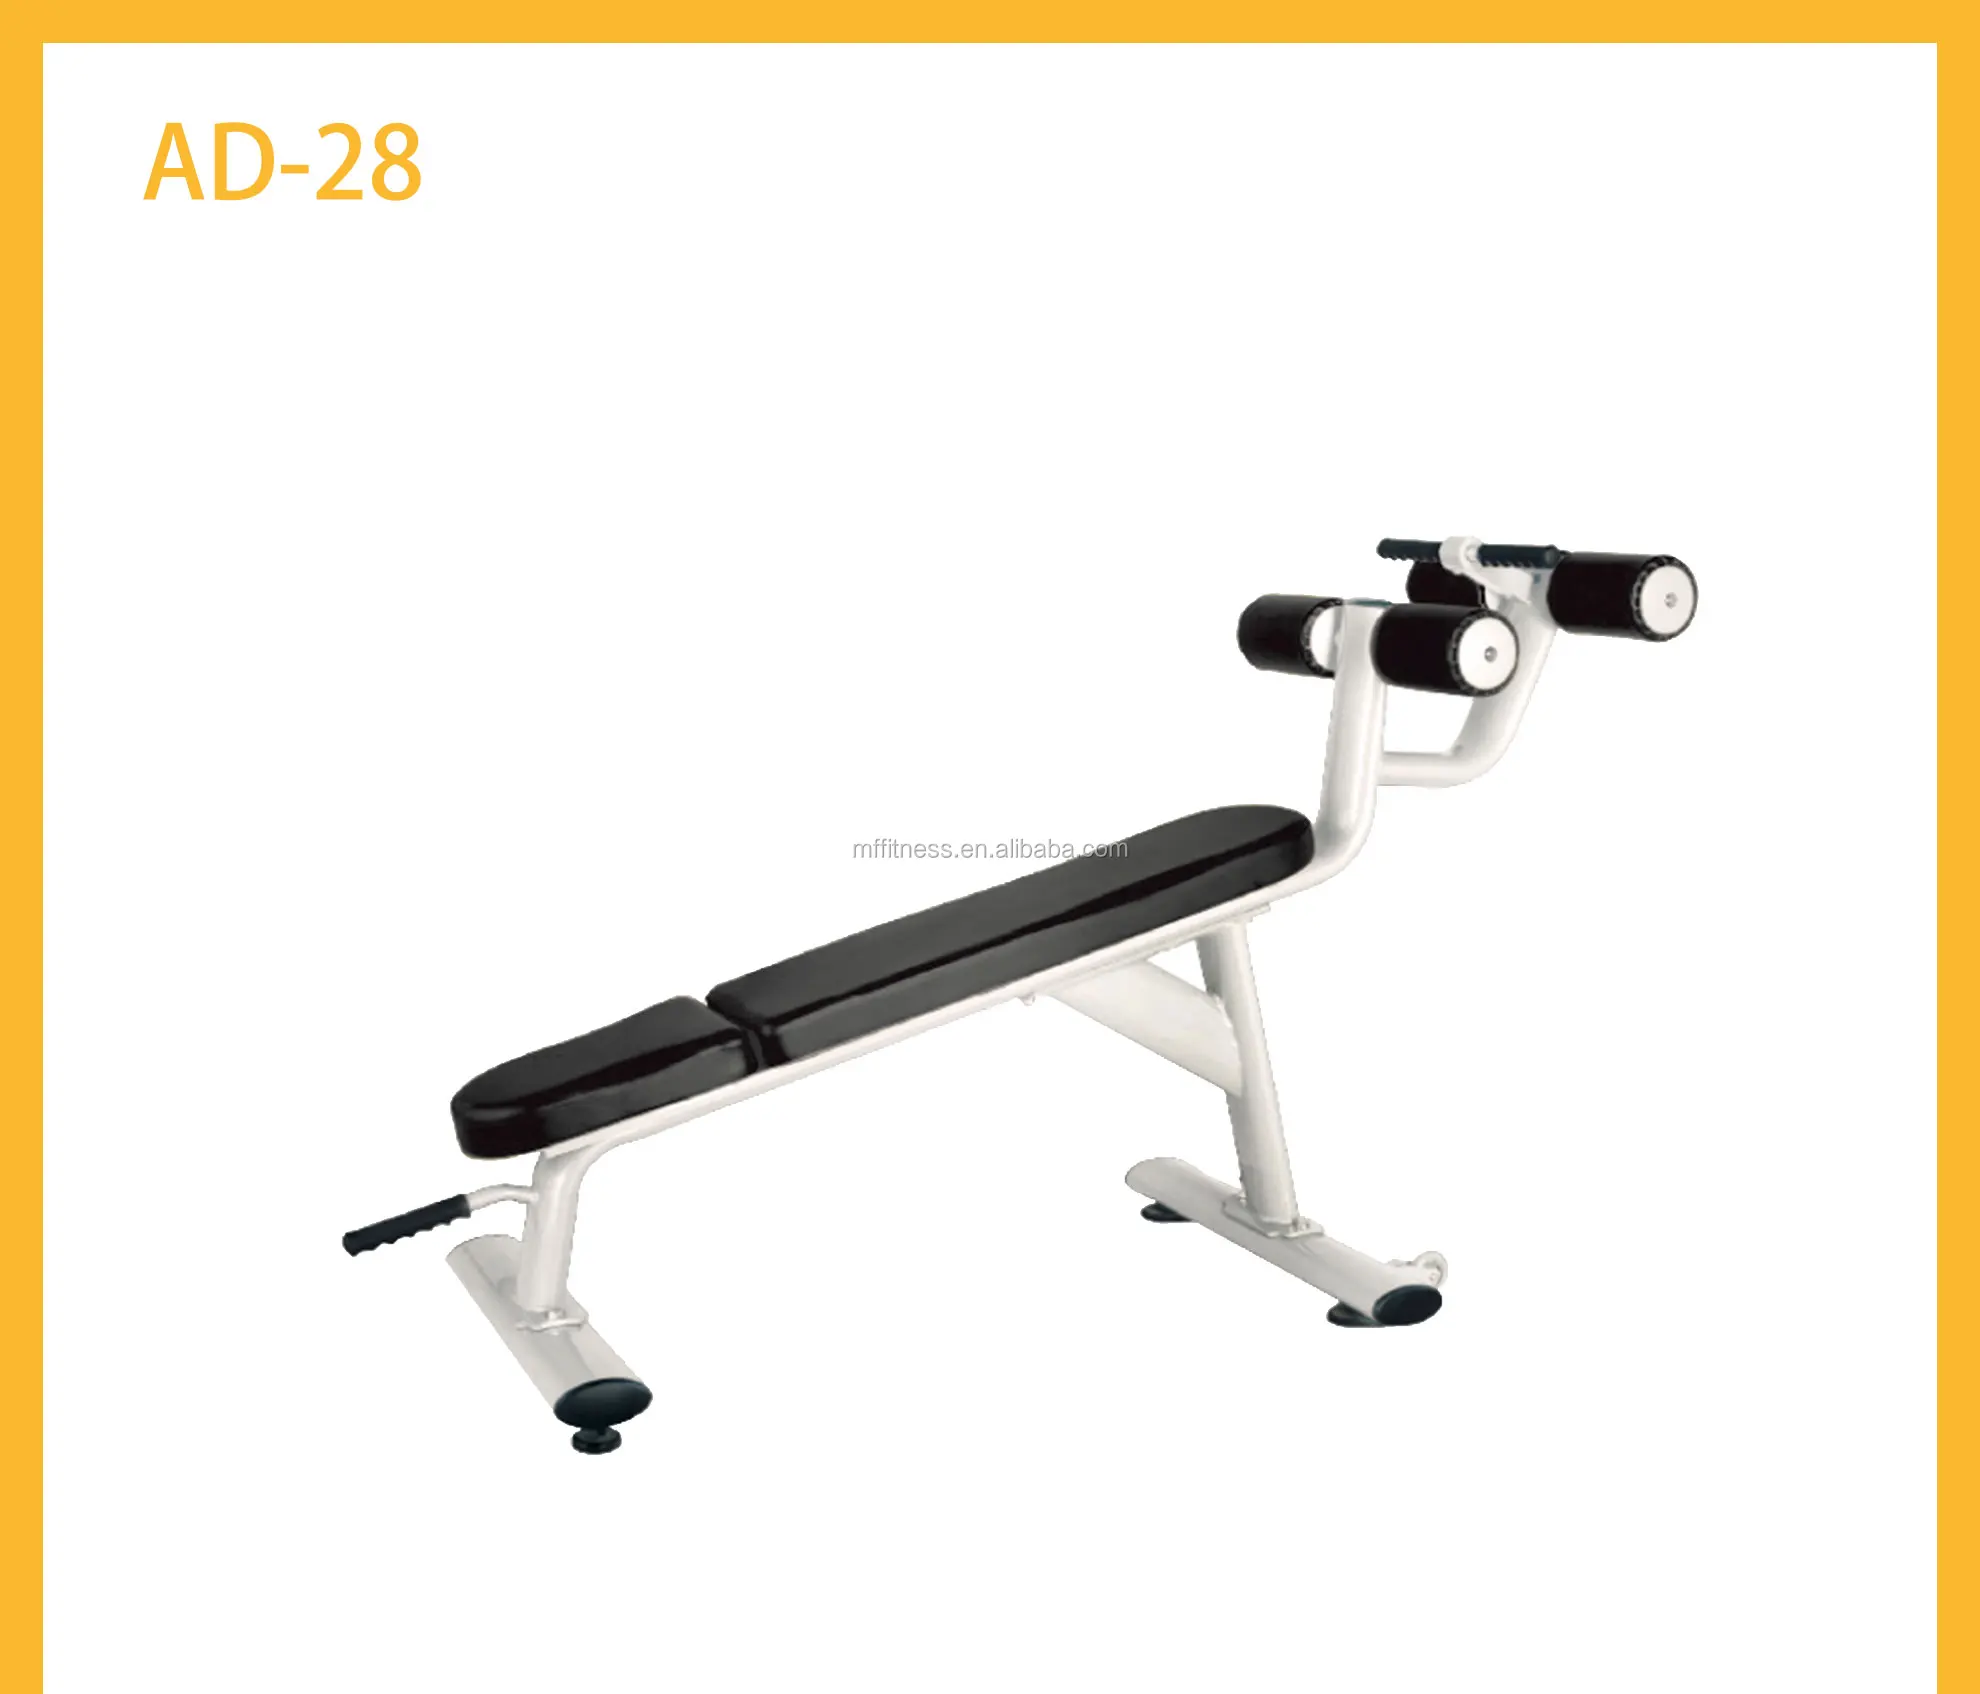 Ad28 Decline Bench Adjustable Web Papan Olympic Bench Buy Adjustable Bench